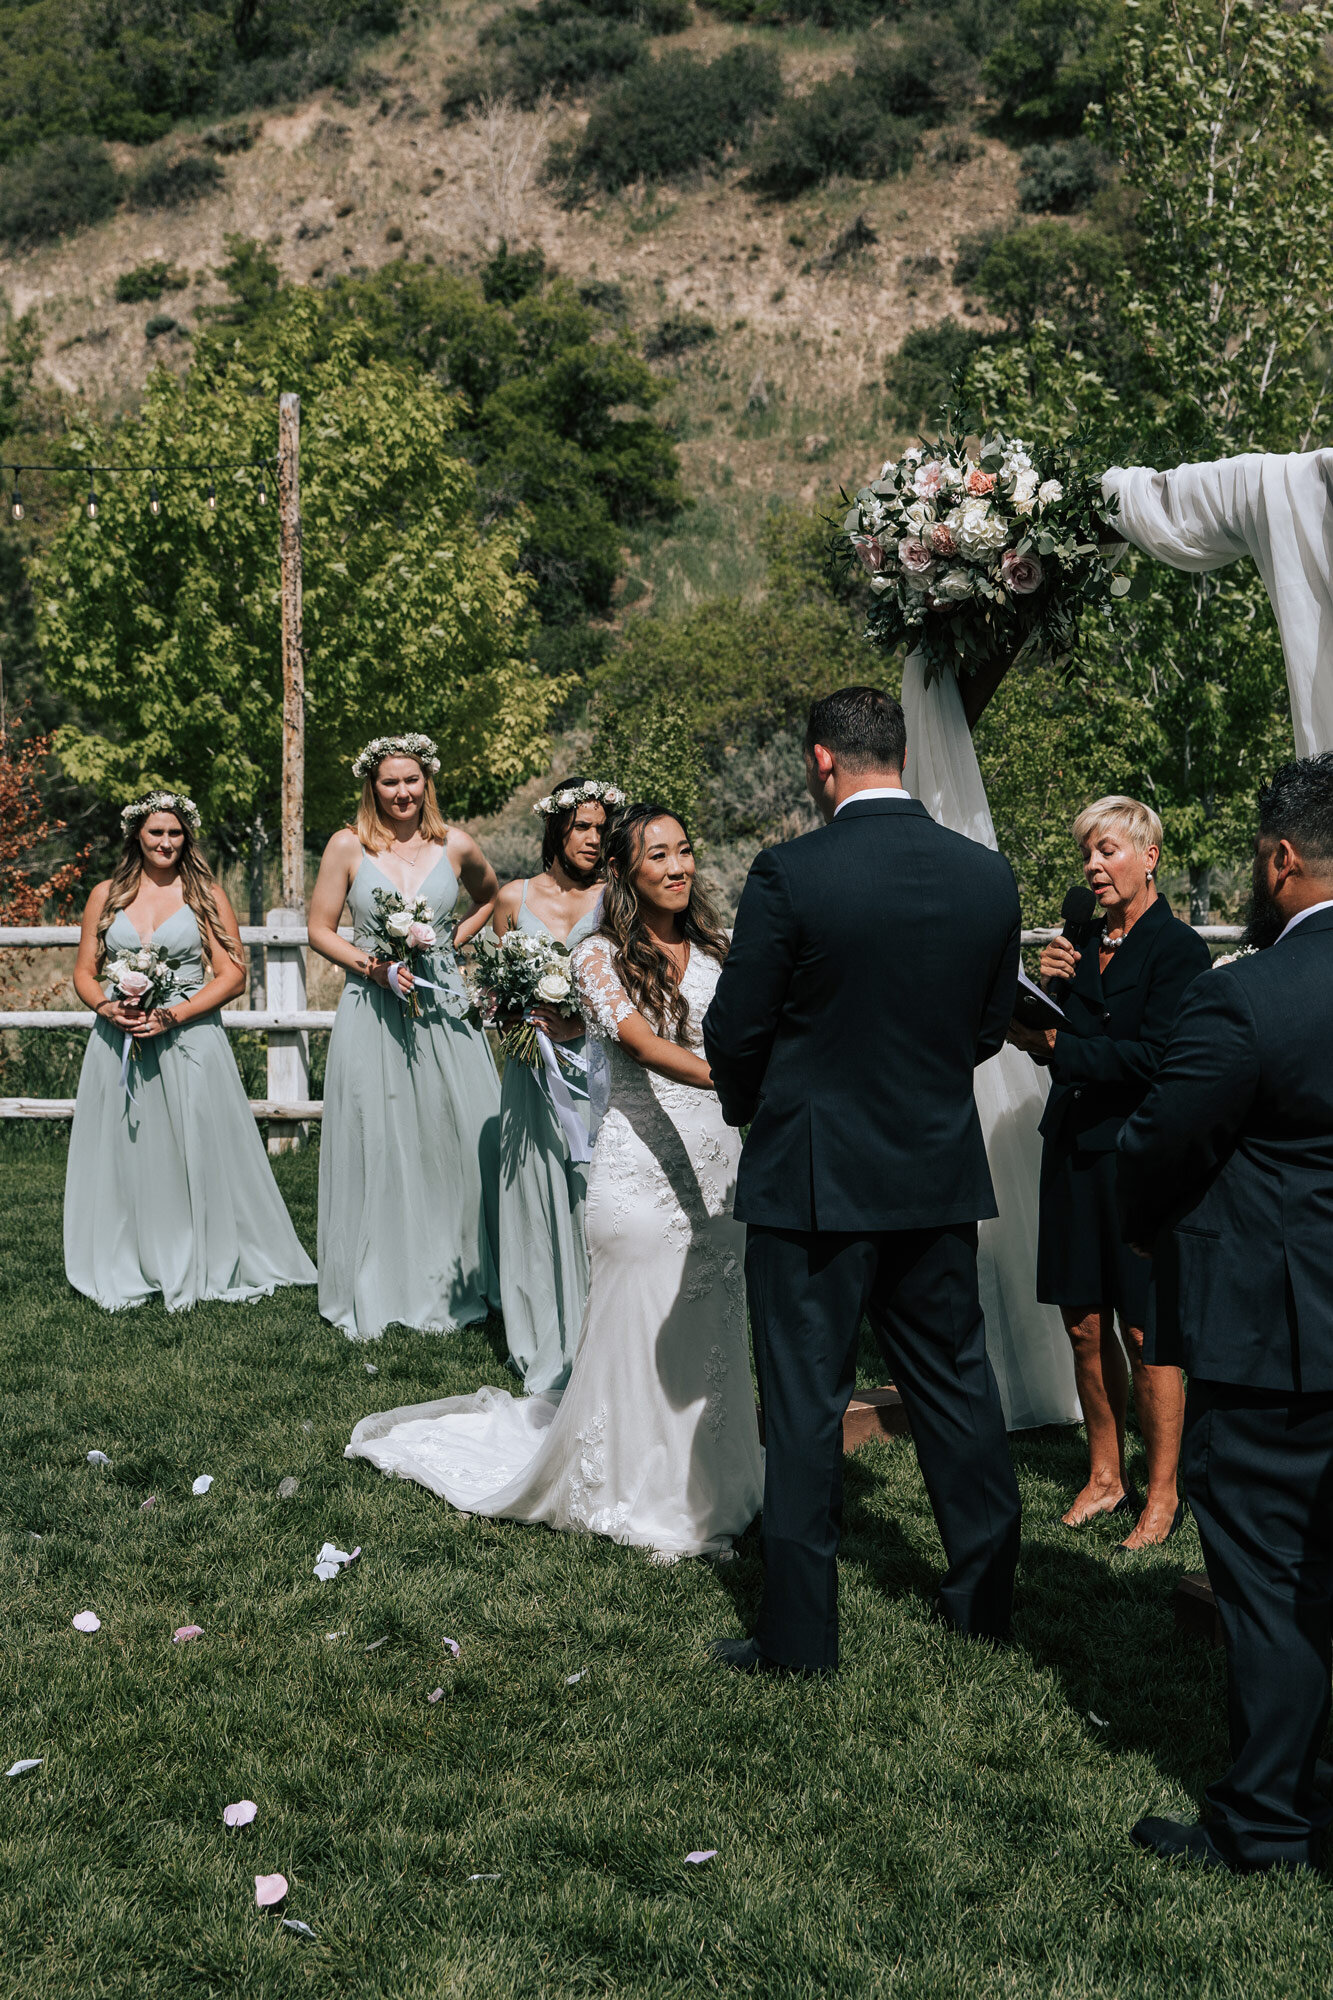  At Quiet Meadow Farms Emily Jenkins Photography captures a bride holding her groom’s hands as they say wedding vows during an outdoor ceremony. bridesmaid dress style muted green dress vows #emilyjenkinsphotography #emilyjenkinsweddings #utahwedding